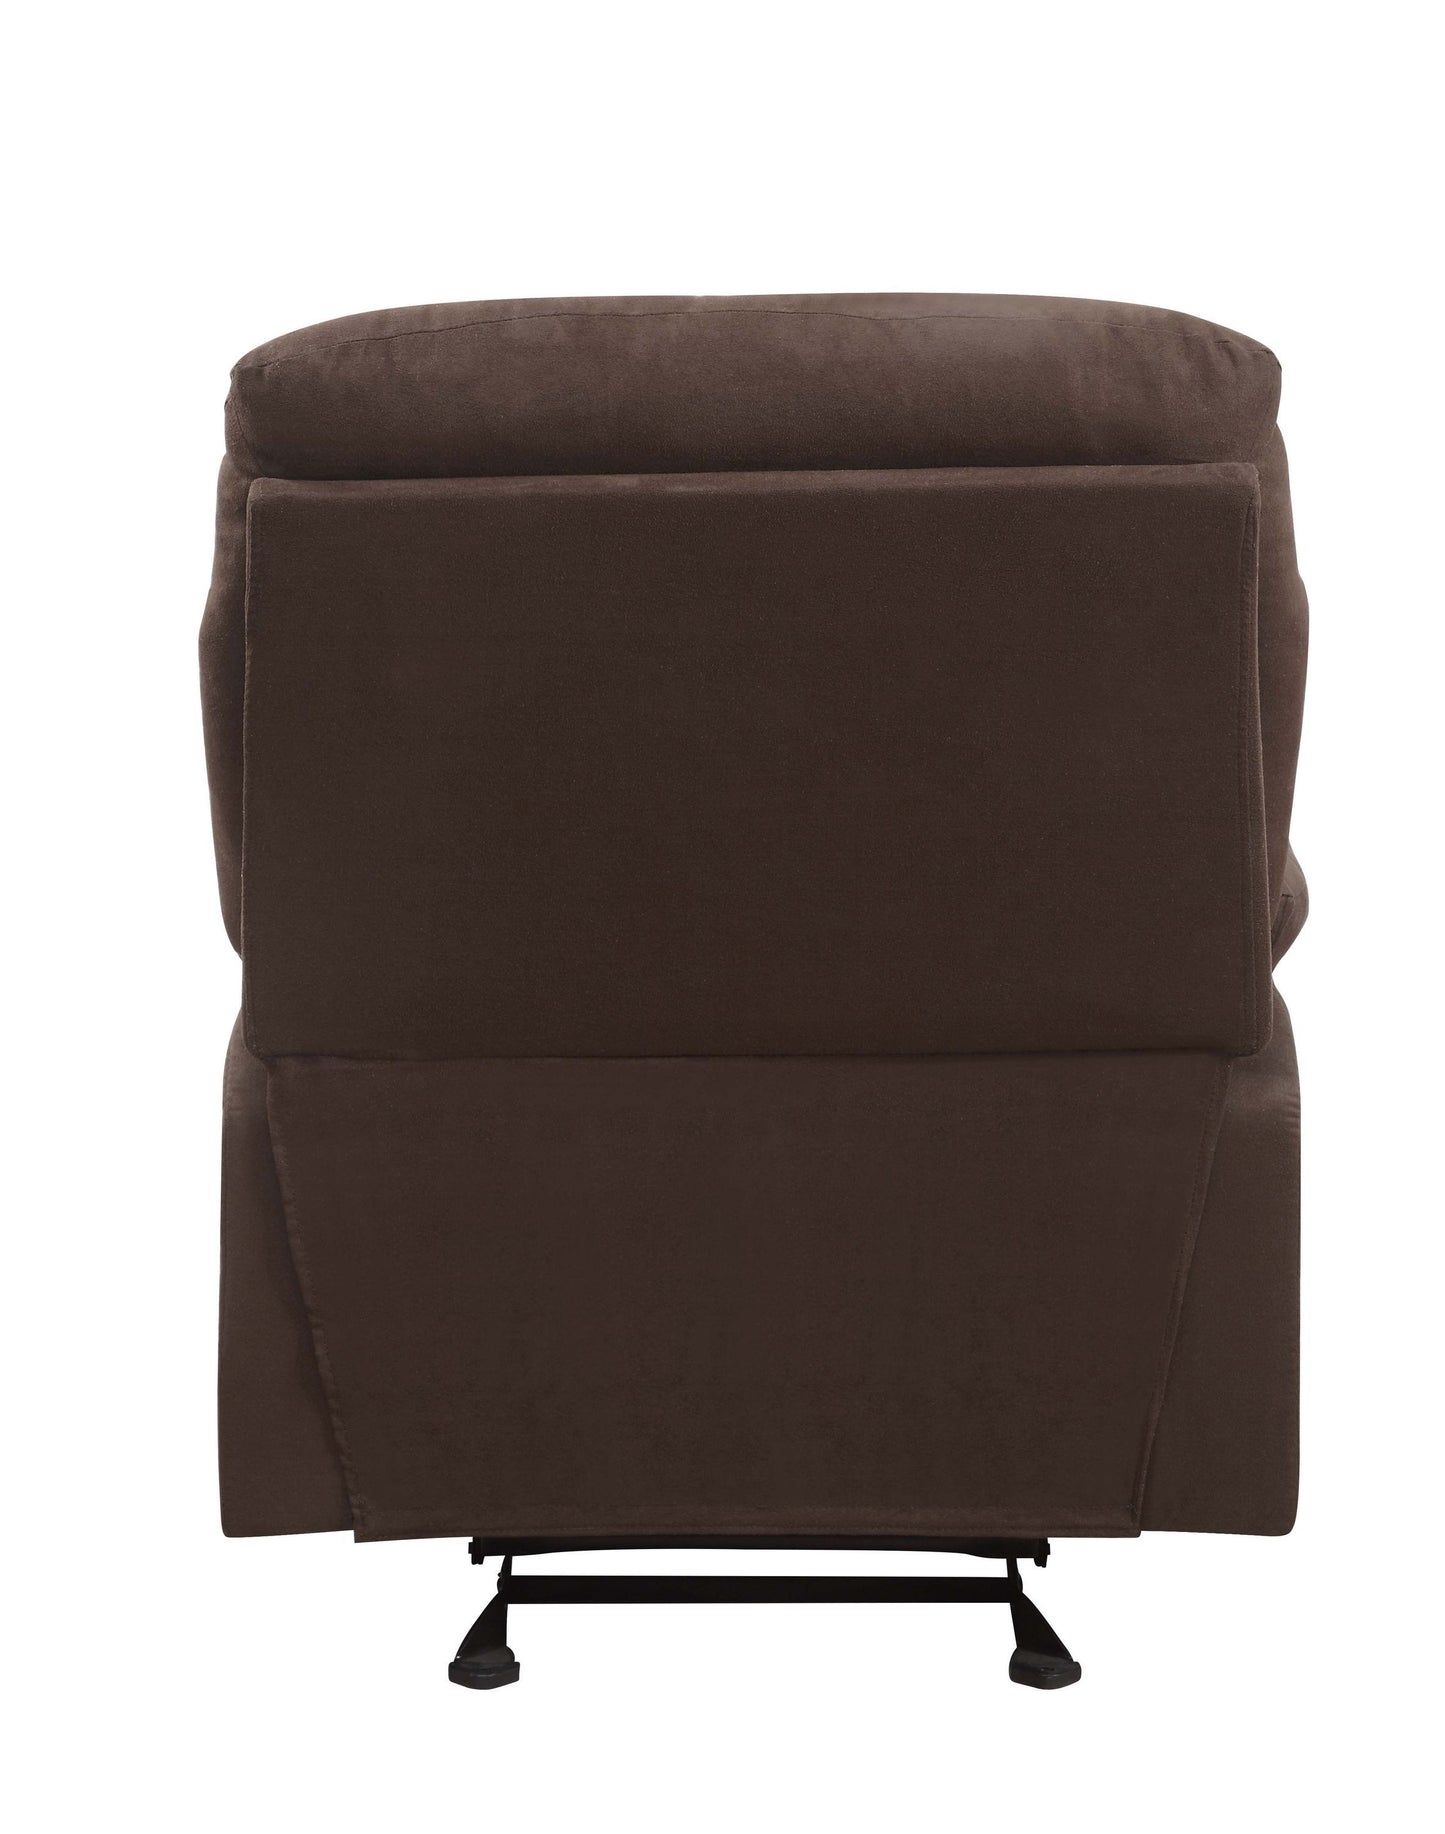 ACME Arcadia Glider Recliner (Motion) in Chocolate Microfiber